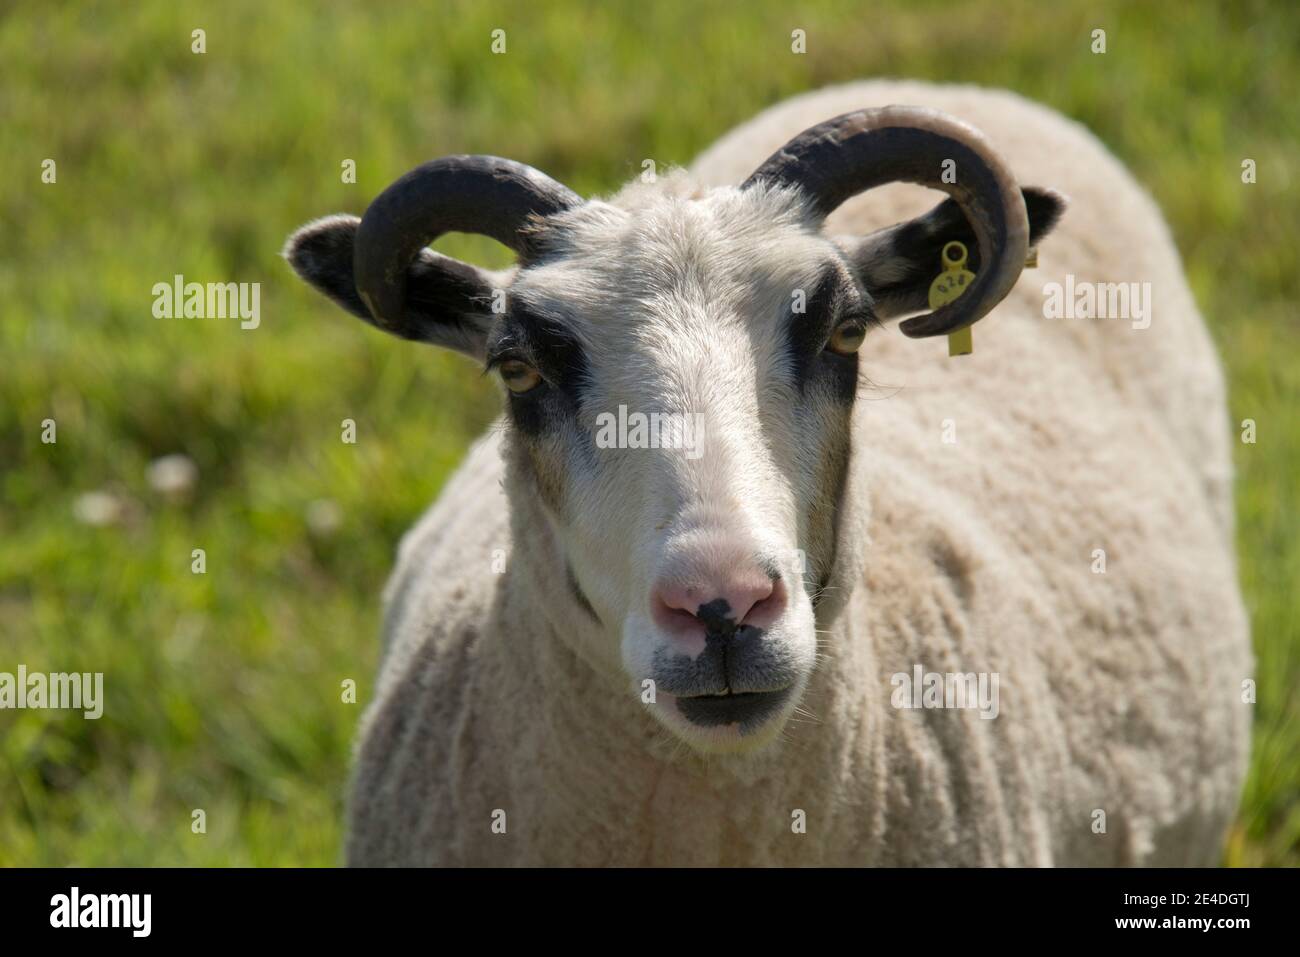 Head and horns of  a pet Shetland wether sheep with black eye 'patches' shortly after shearing, Berkshire, July Stock Photo